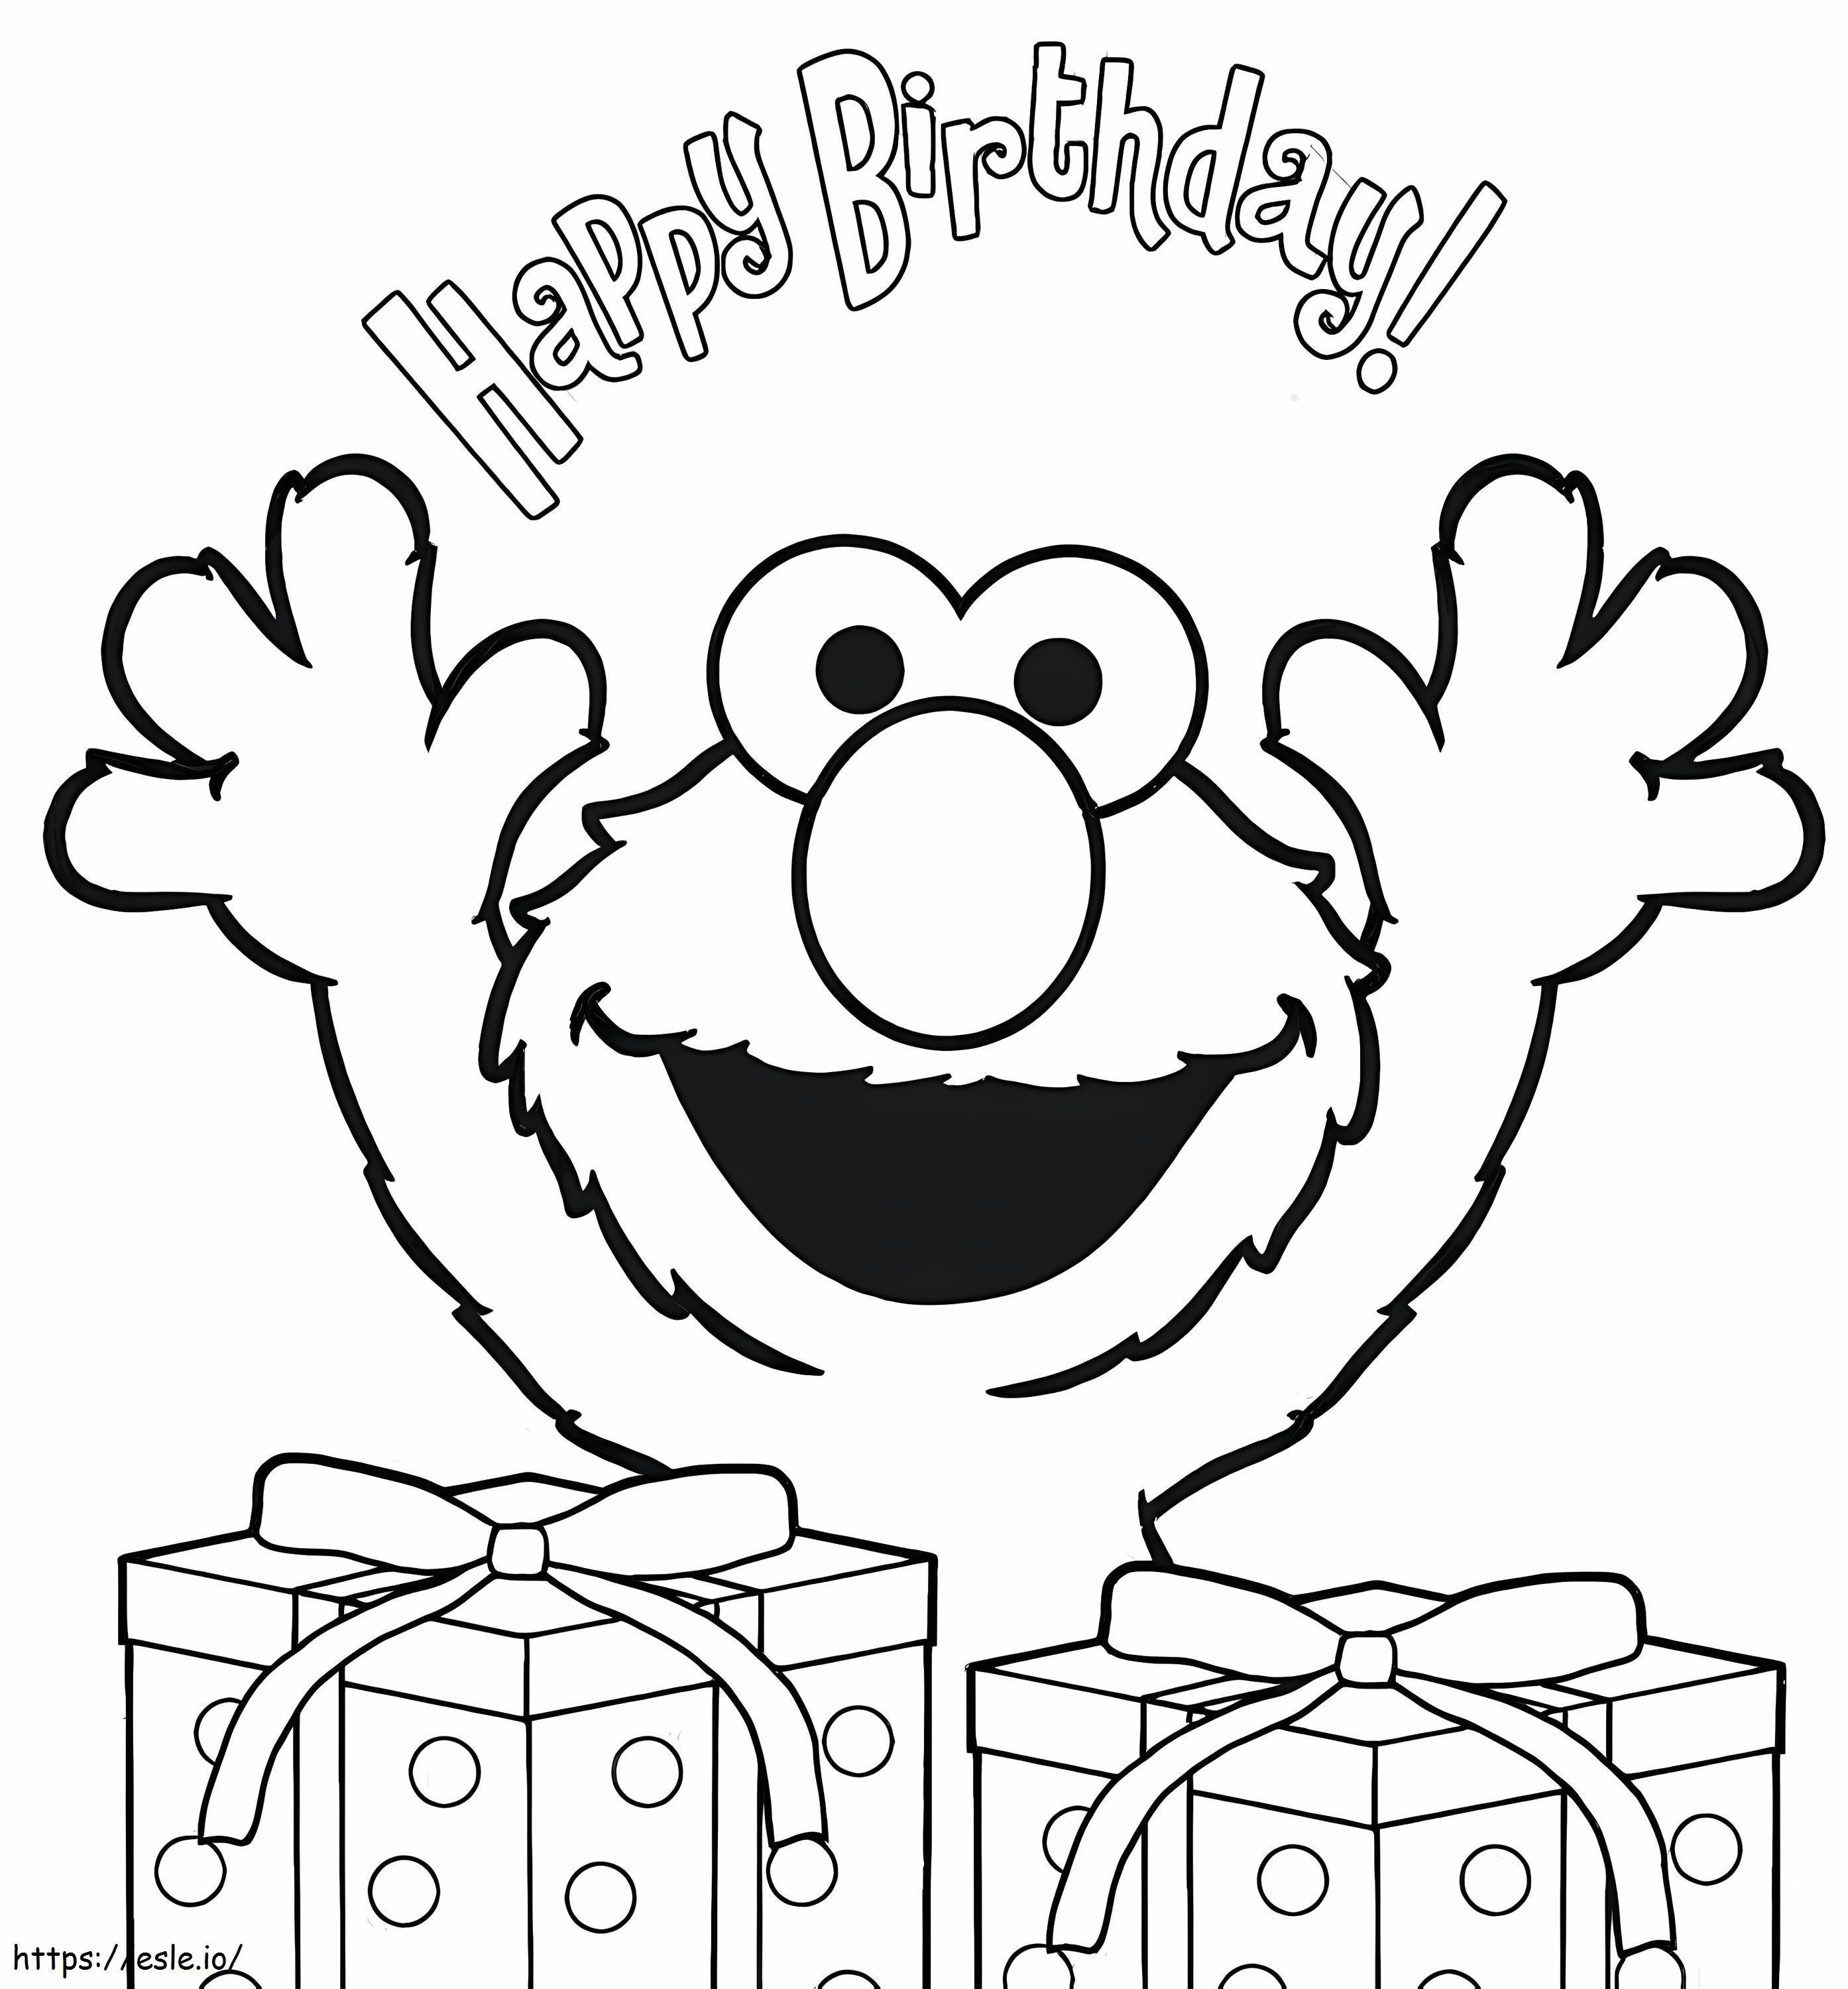 Elmo To Print For Kids 31950 coloring page